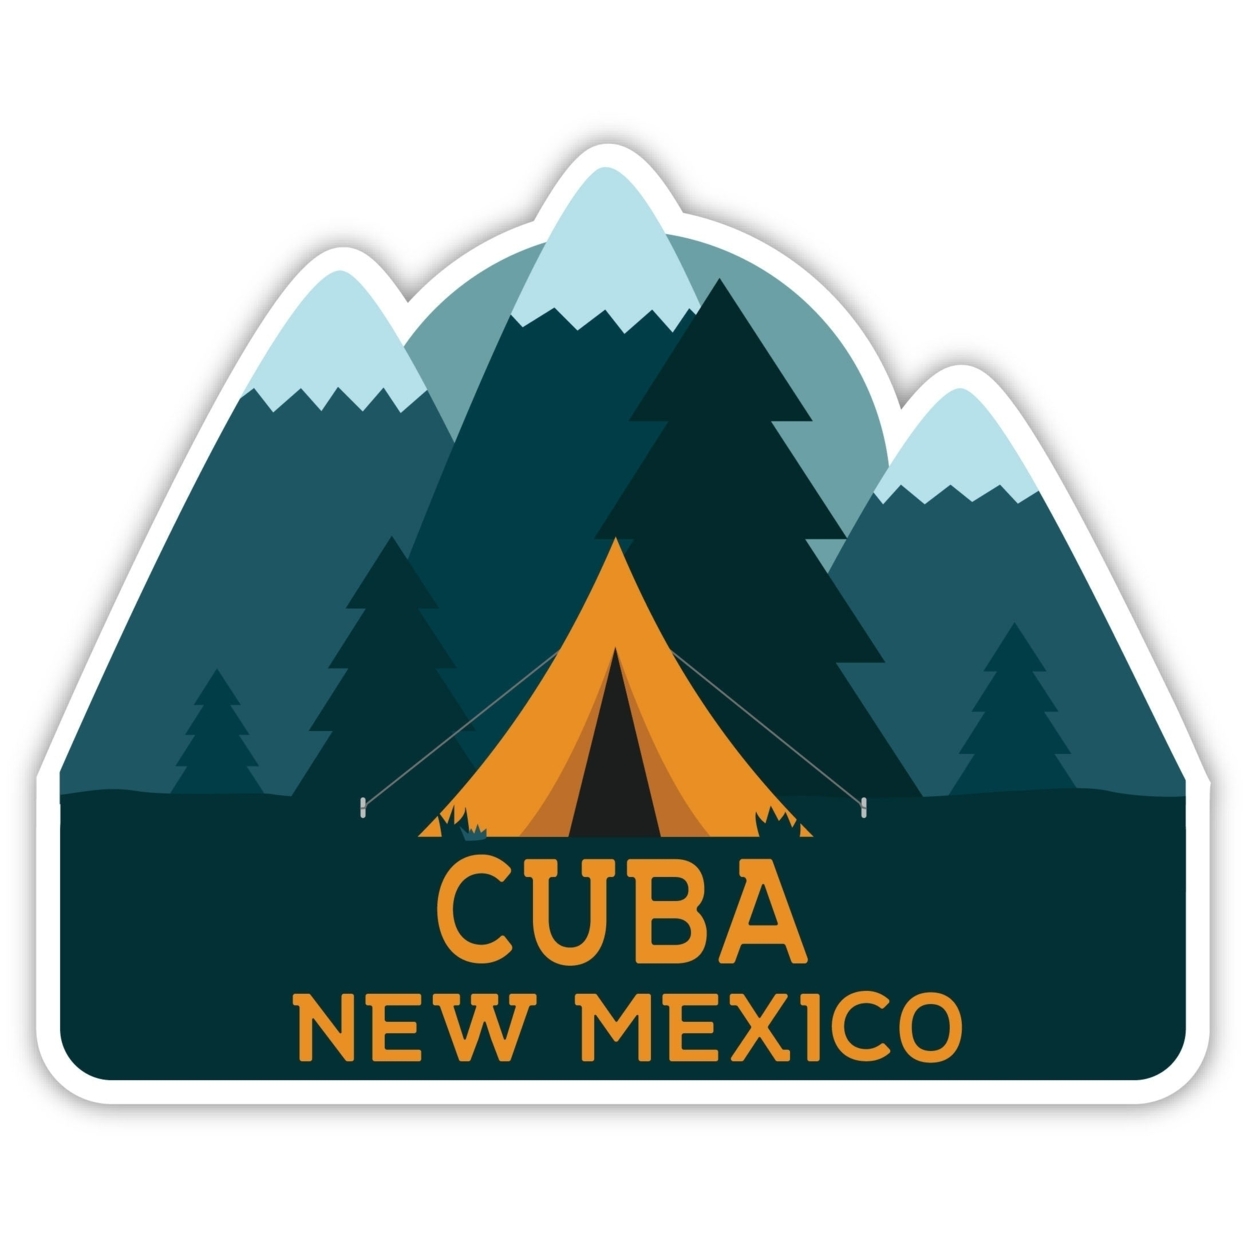 Cuba New Mexico Souvenir Decorative Stickers (Choose Theme And Size) - 4-Pack, 4-Inch, Tent